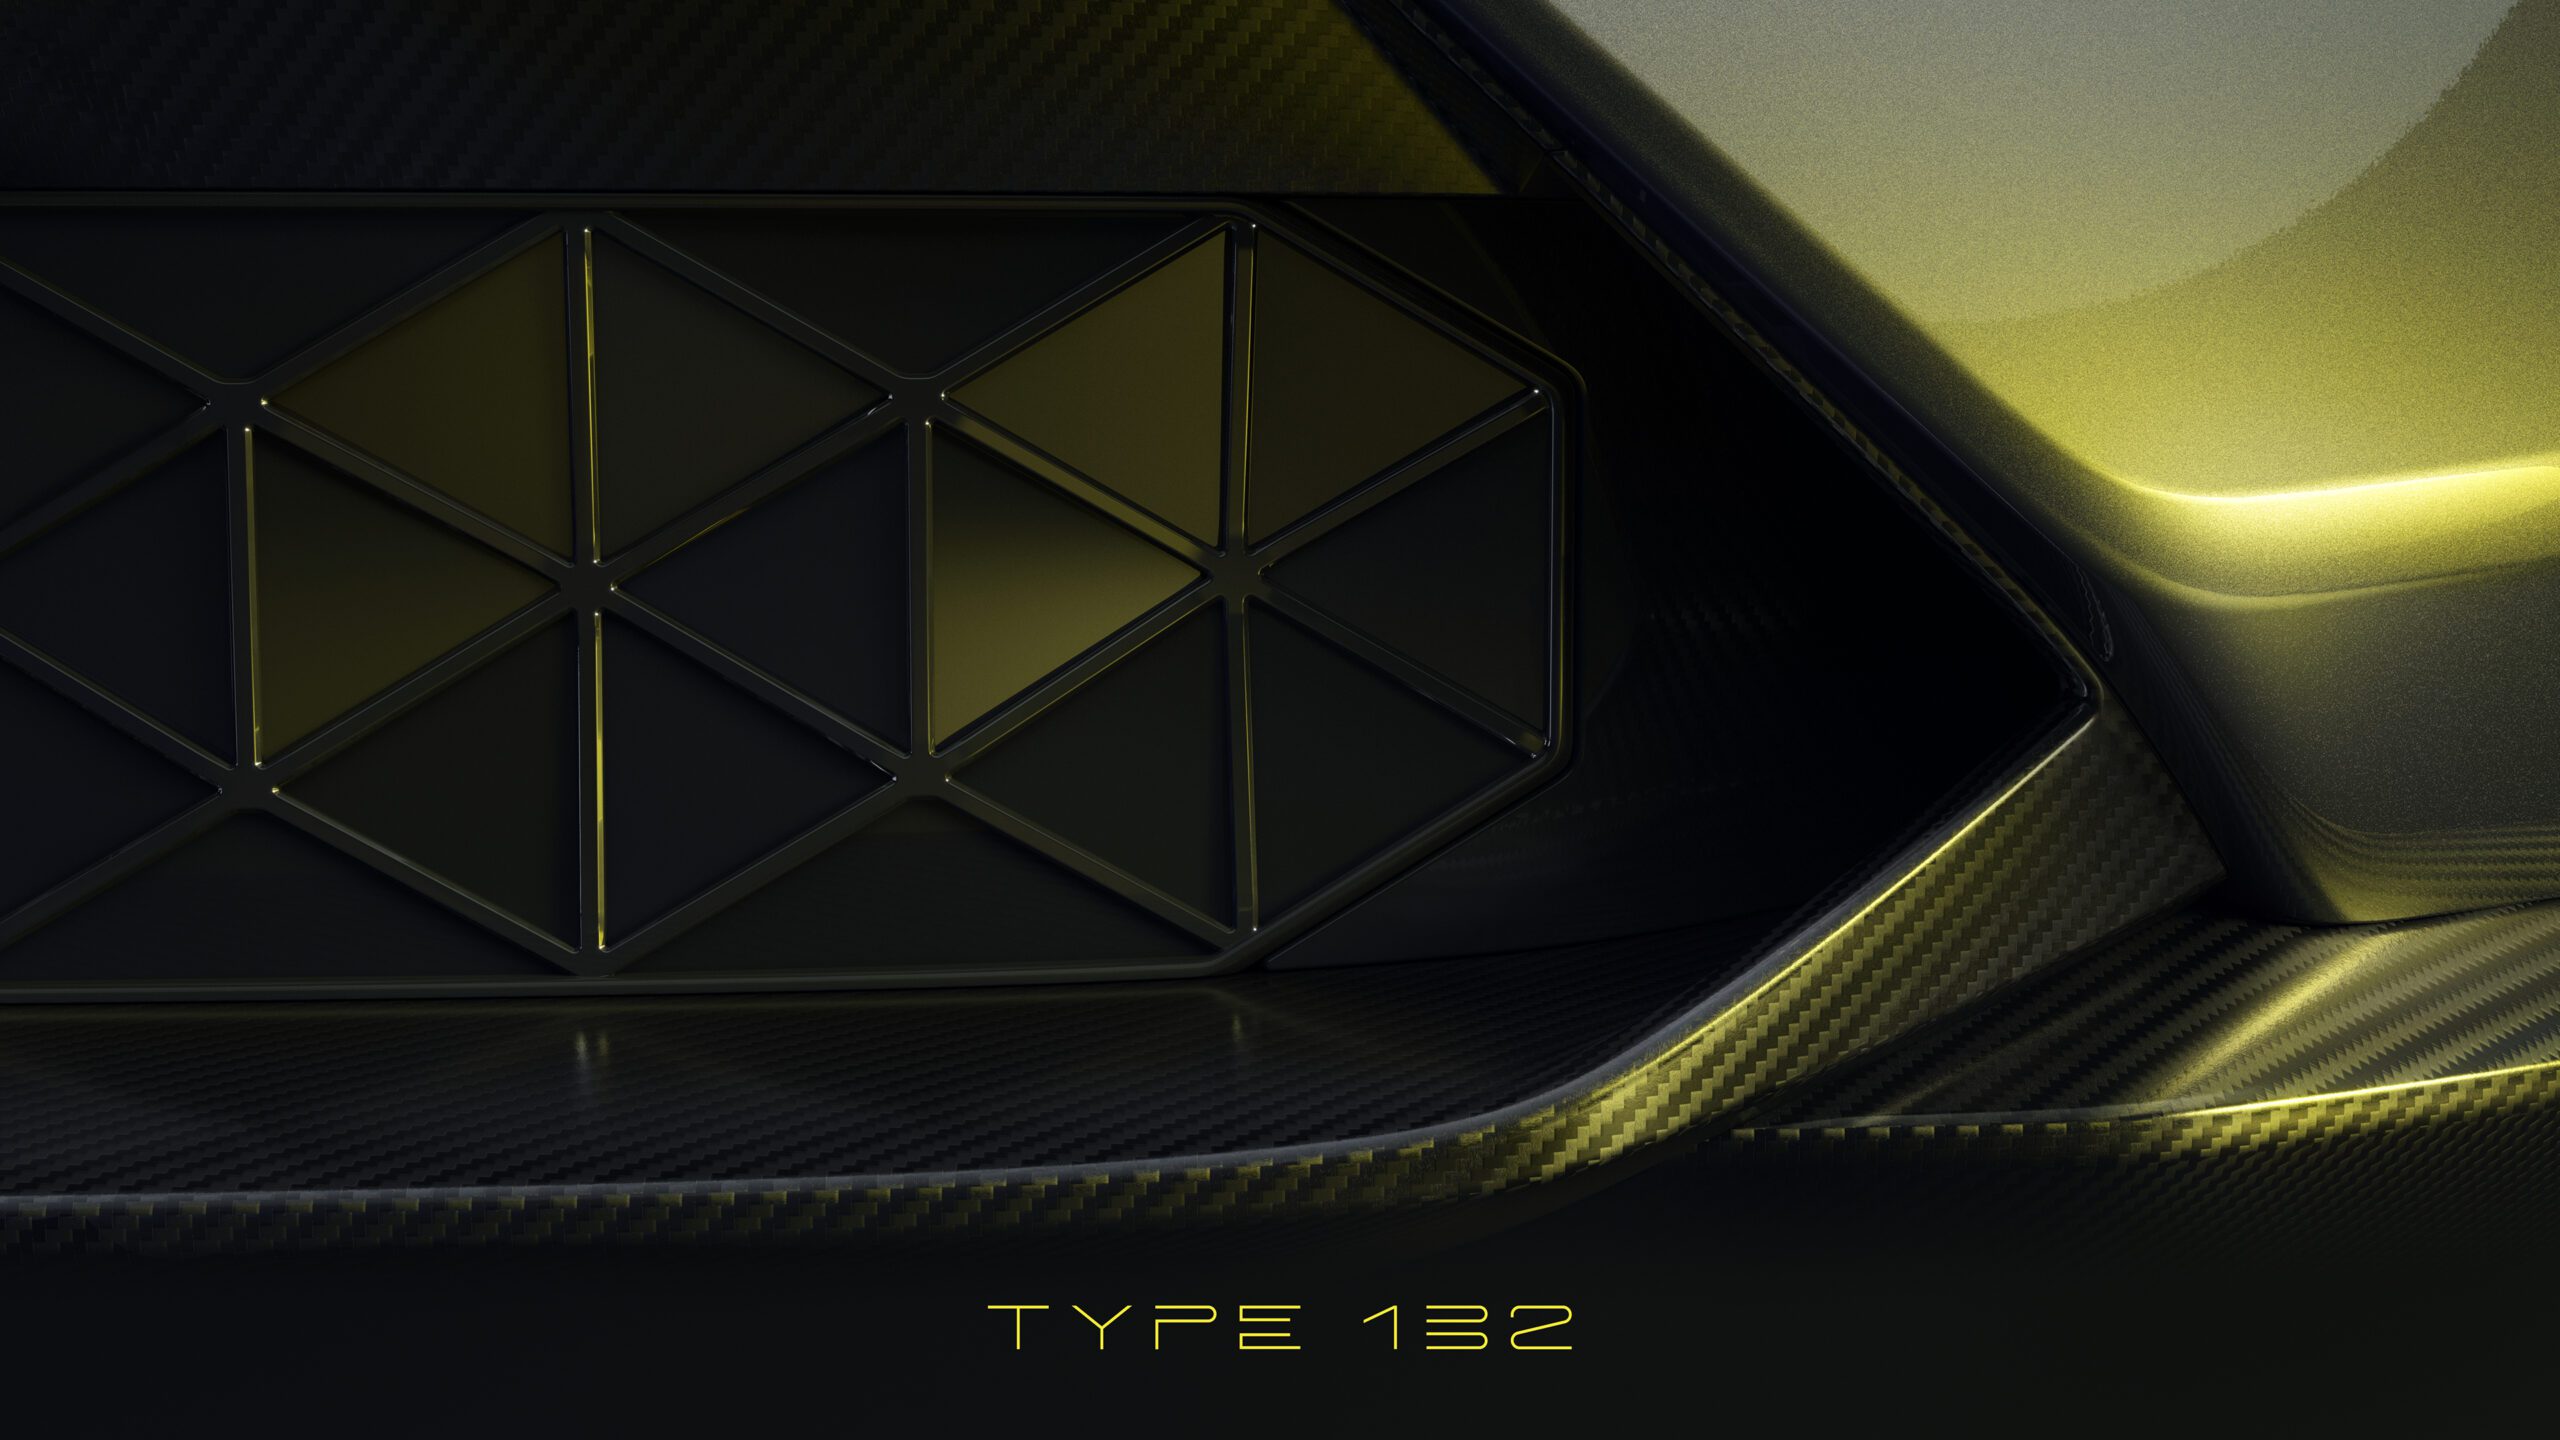 Teaser of the Lotus Type 132 concept